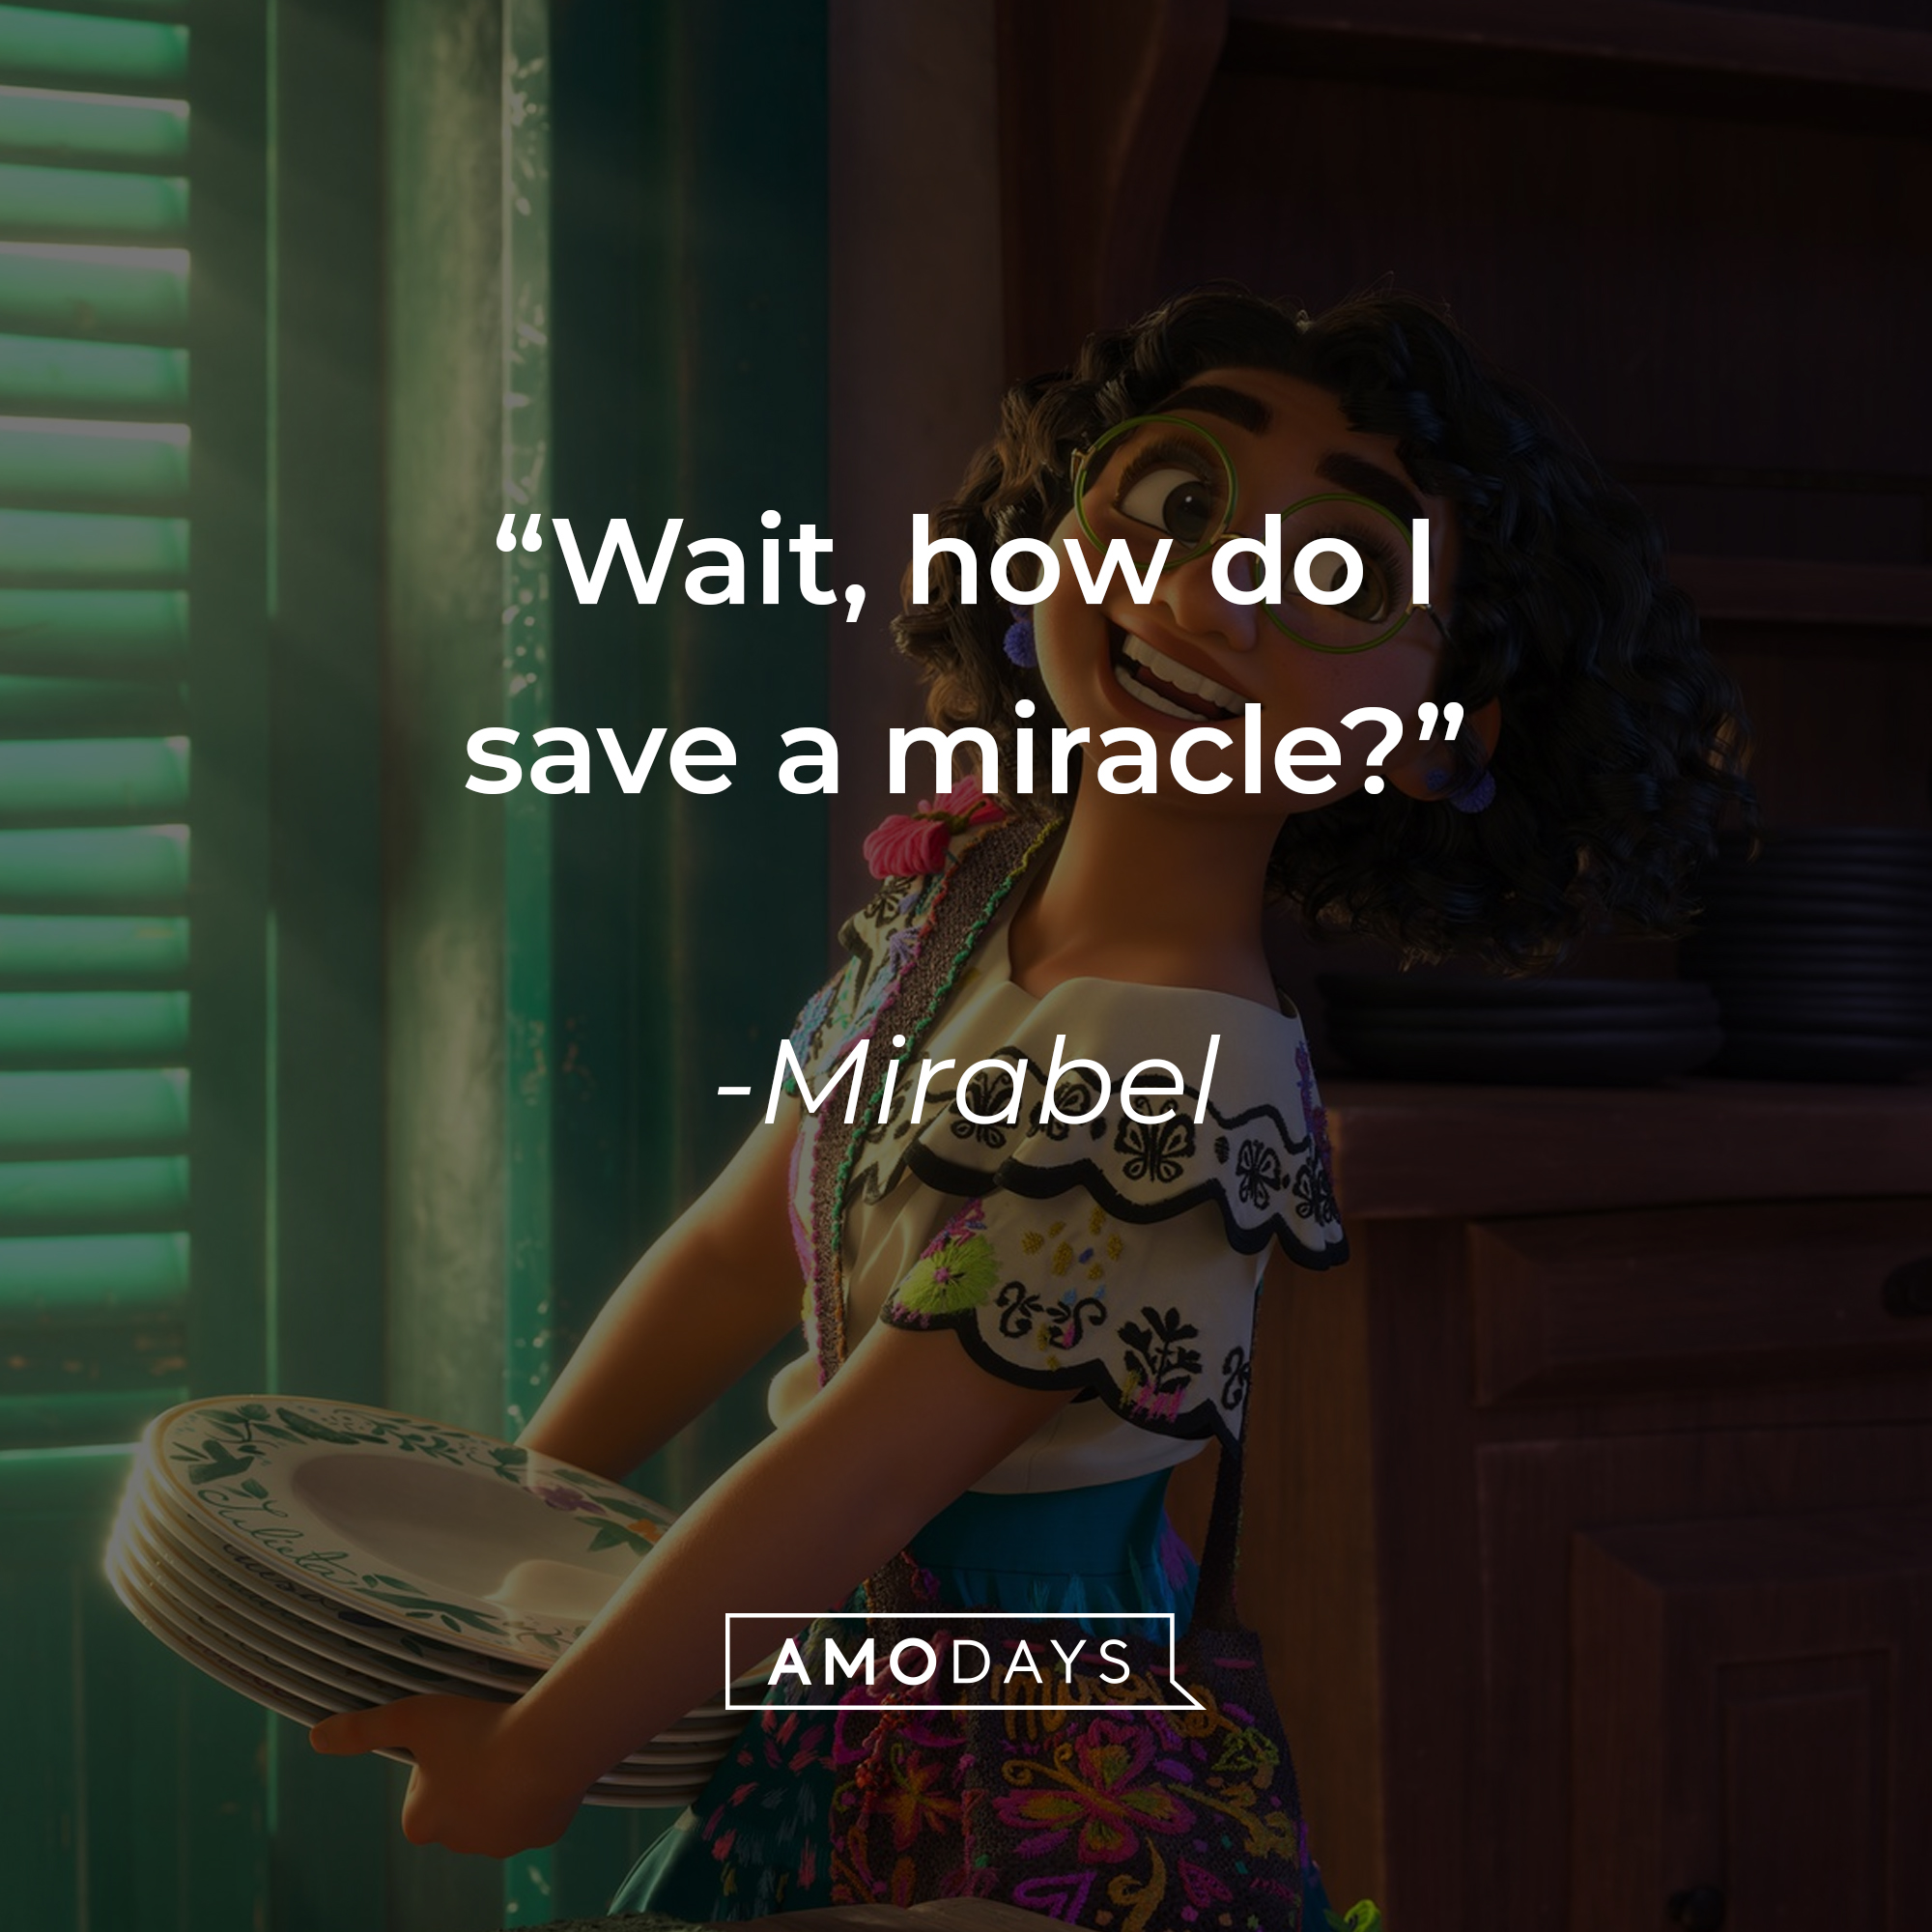 Mirabel's quote: “Wait, how do I save a miracle?" | Source: Facebook.com/EncantoMovie